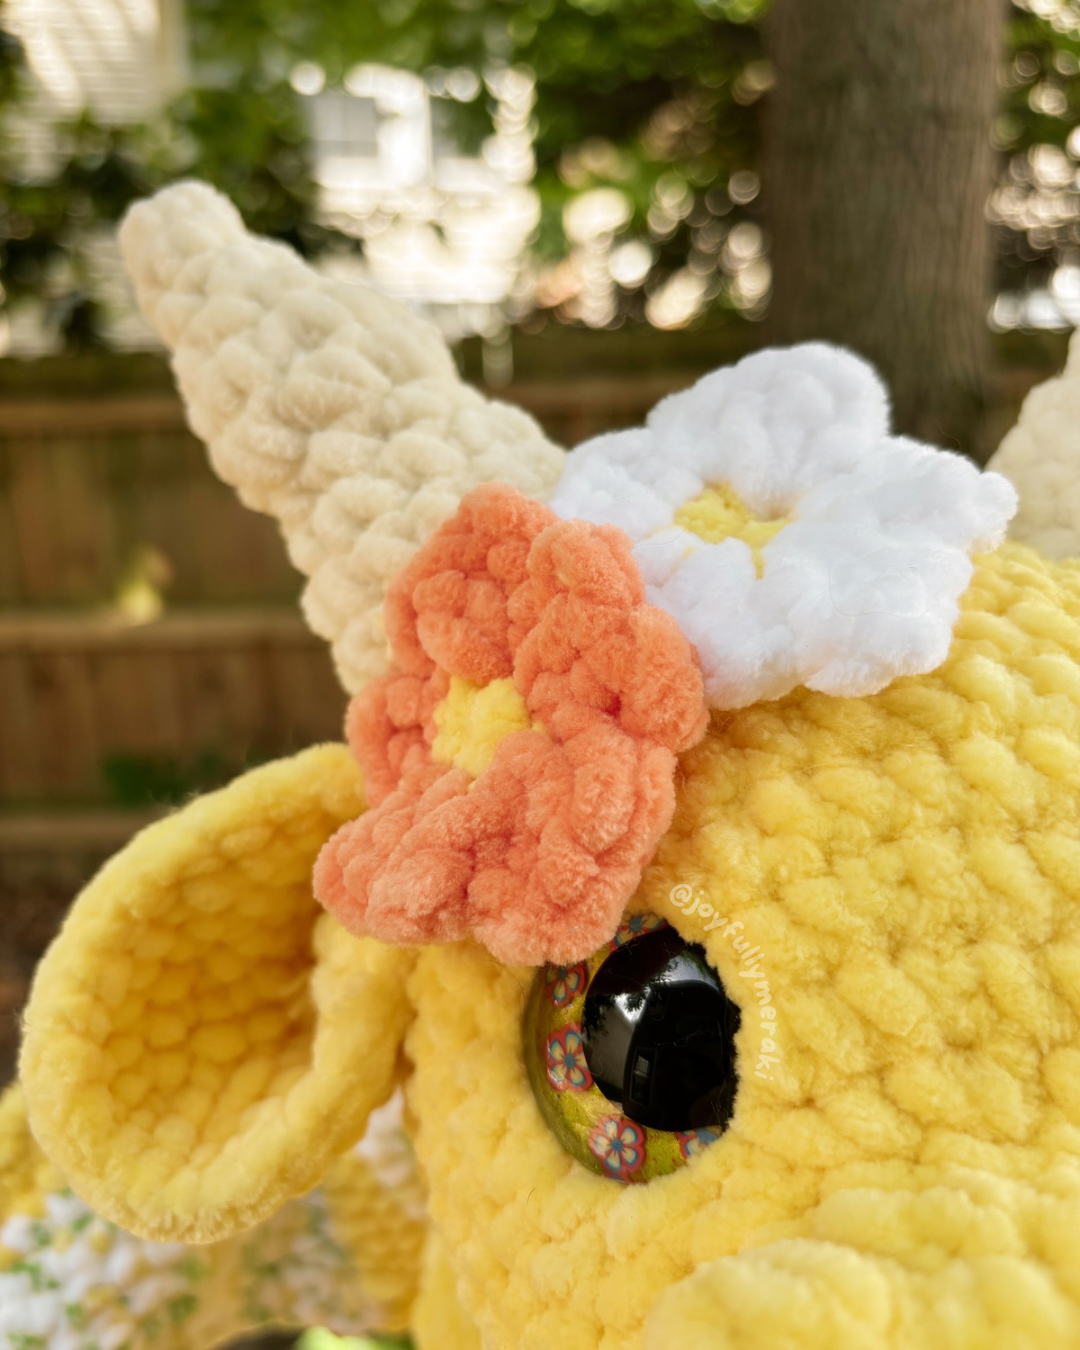 Giant Floral Dragon Crocheted Plushie